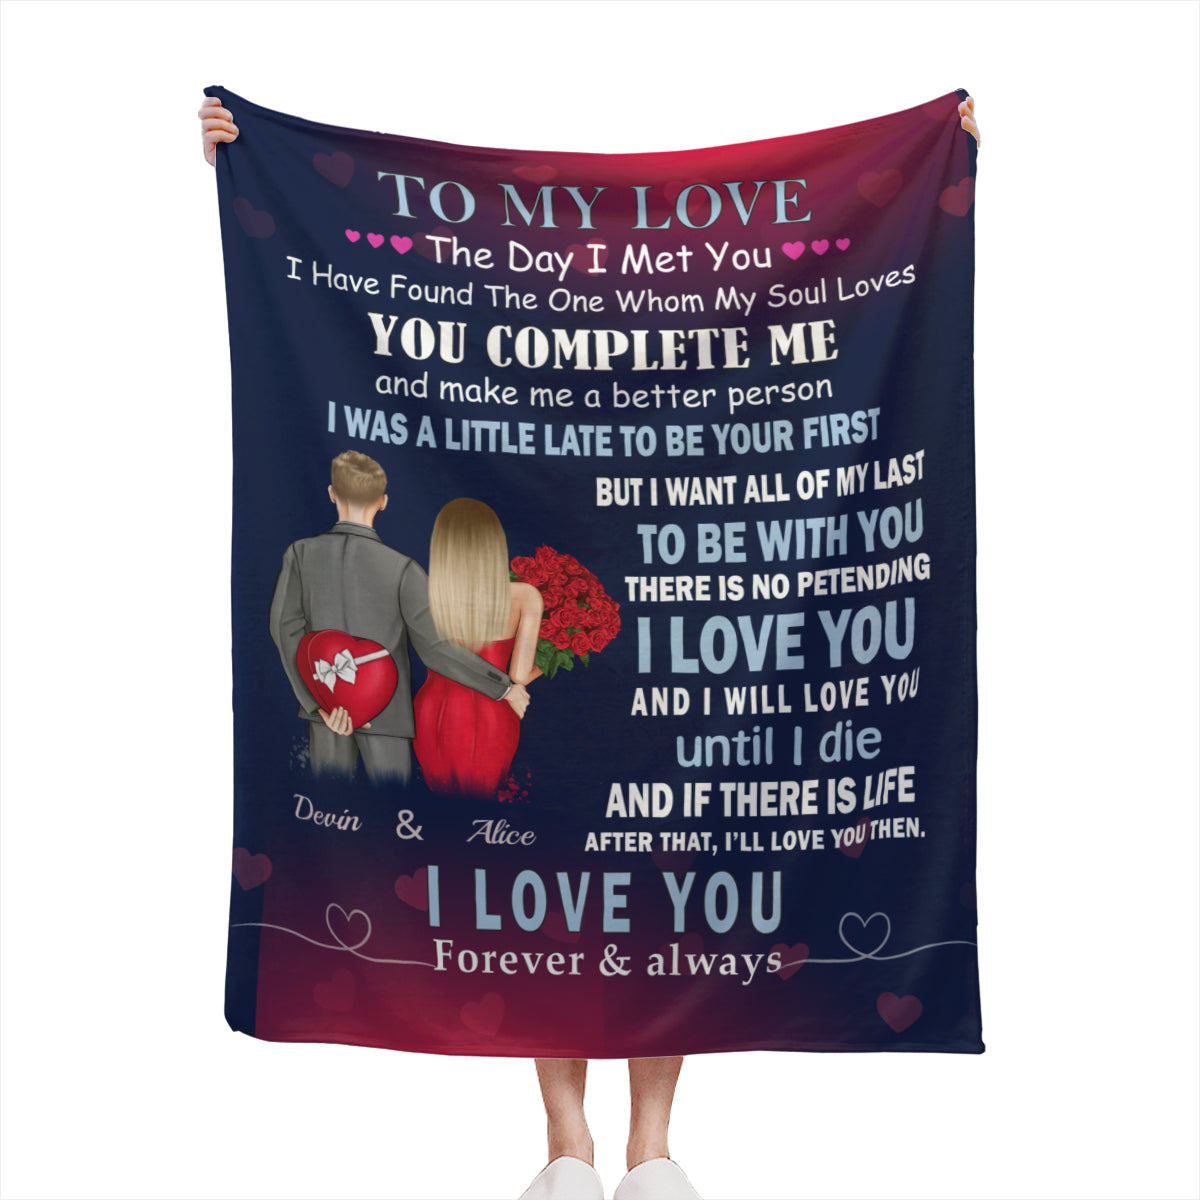 To My Love I Love You Forever- Custom Blanket for Couple or Lover